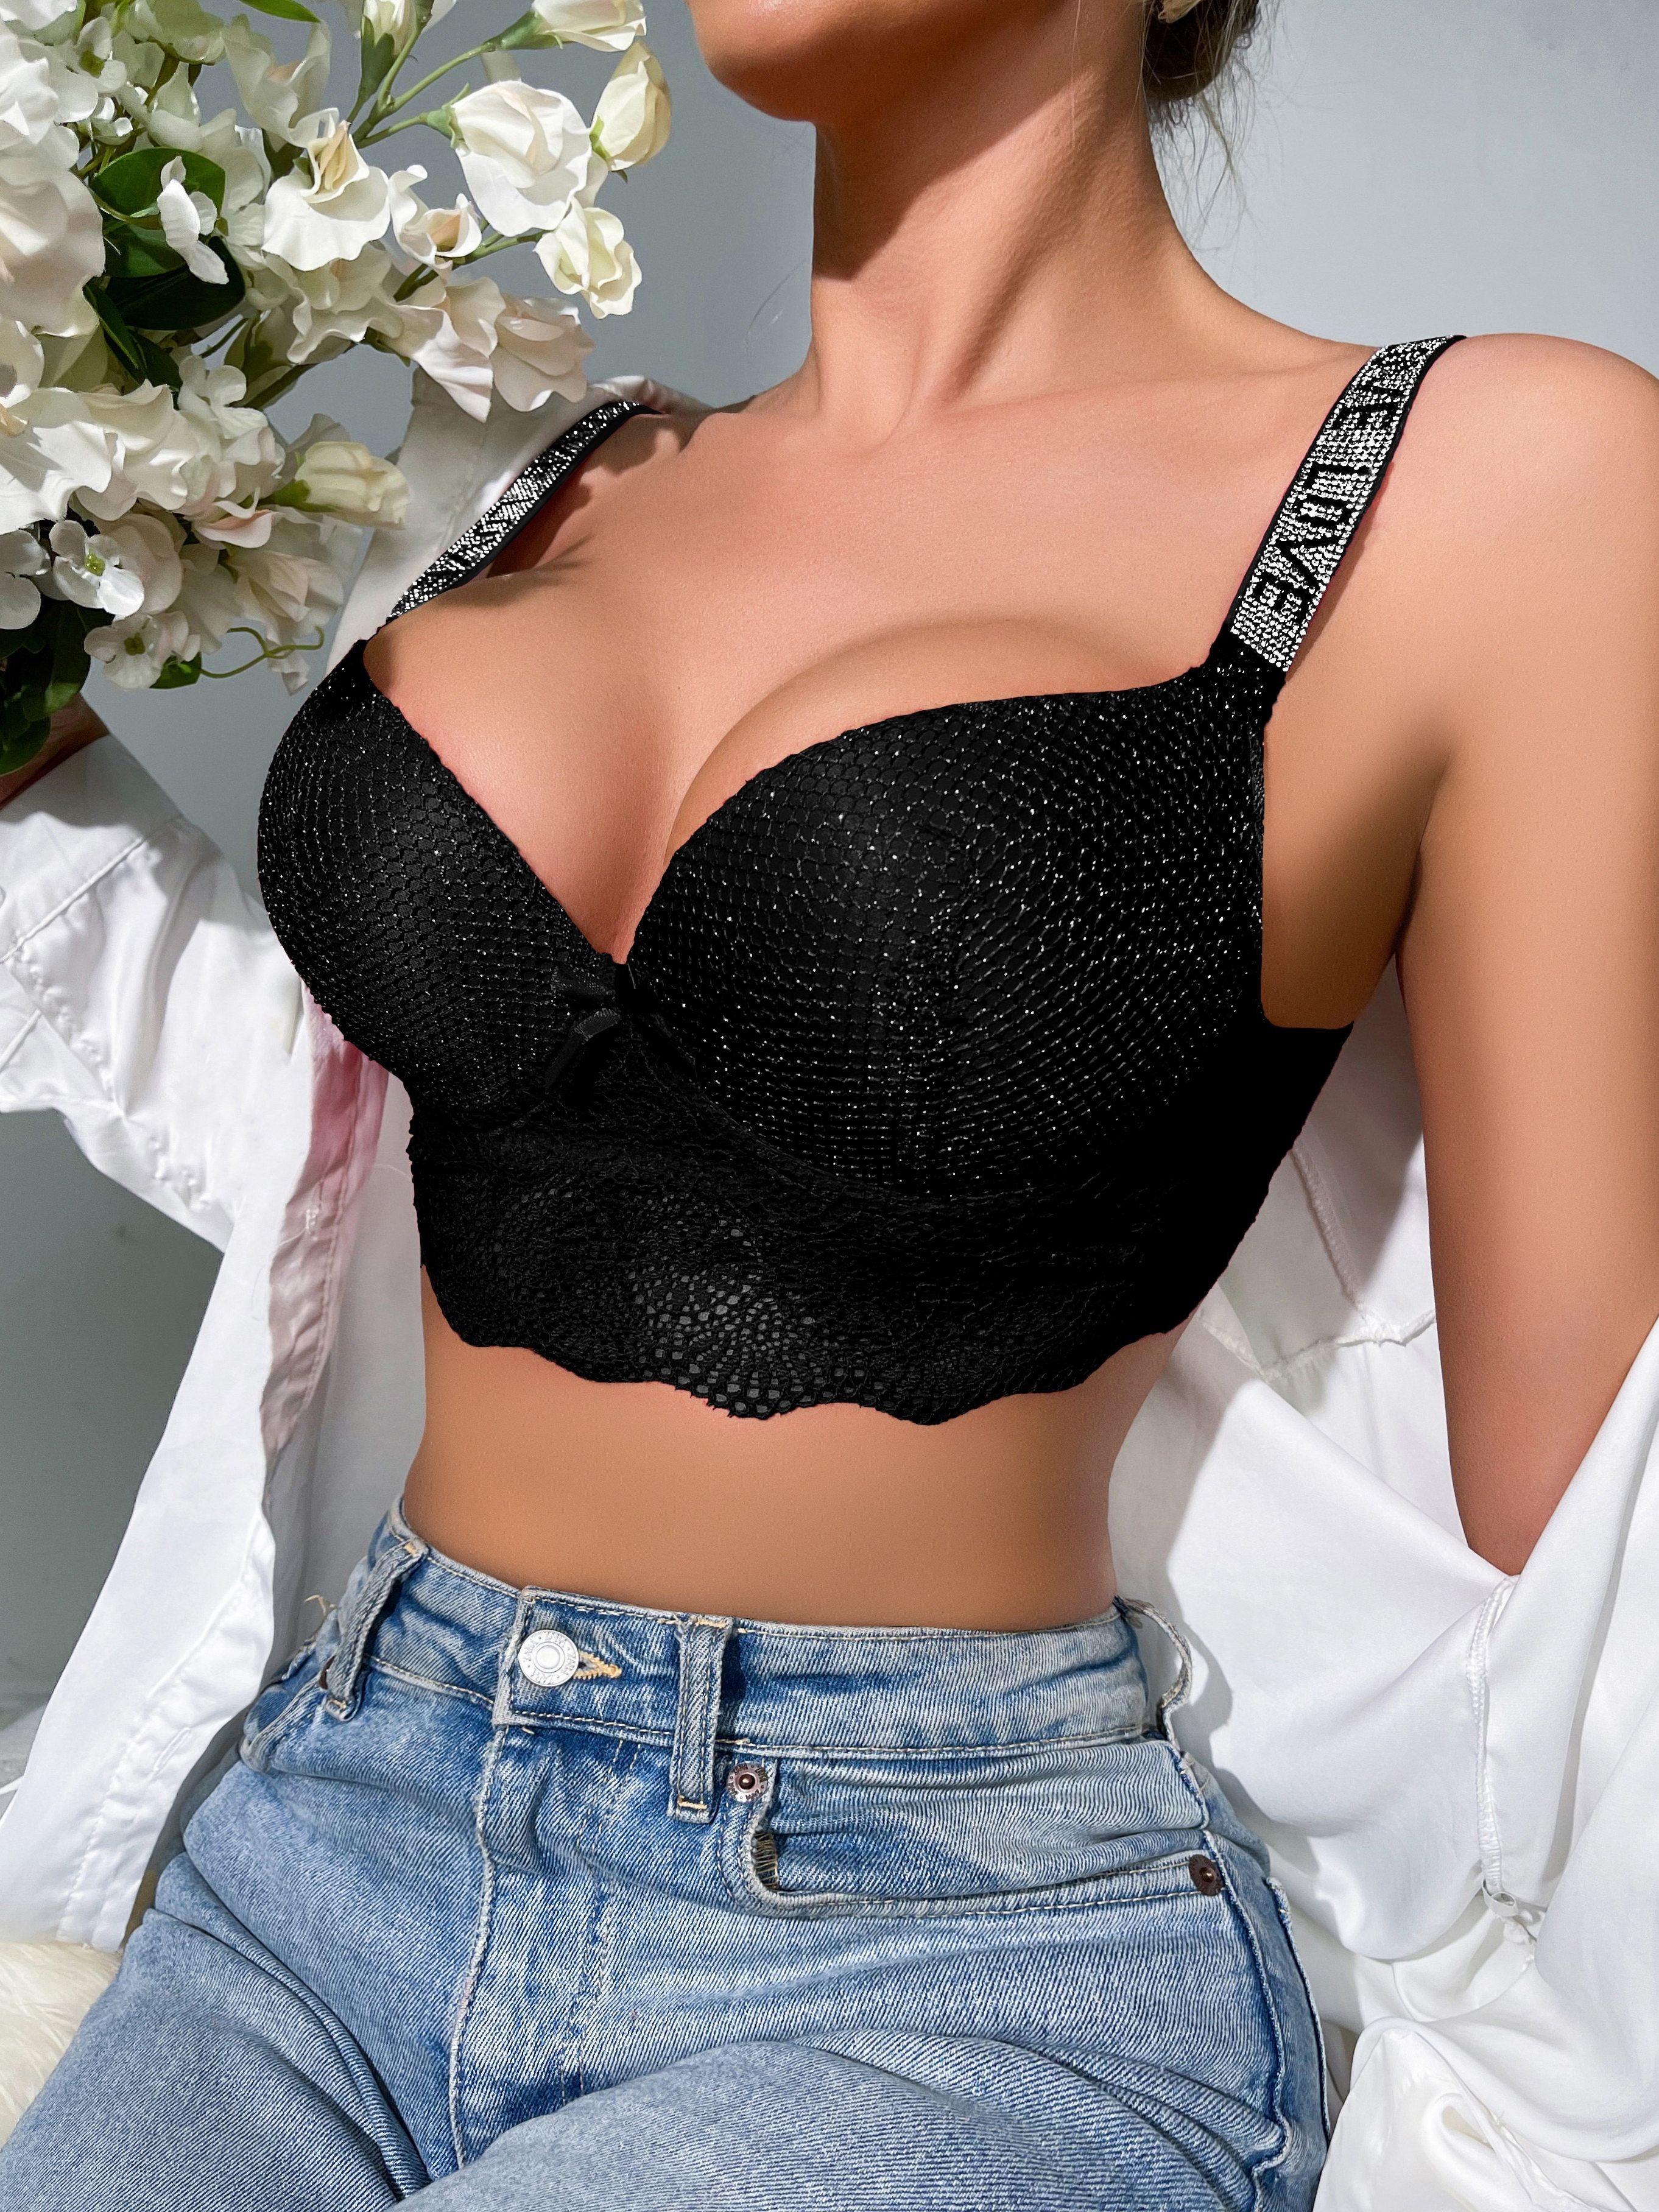 Women's Sexy Push Up Bra With Rhinestone Strap, Lace Edge, And